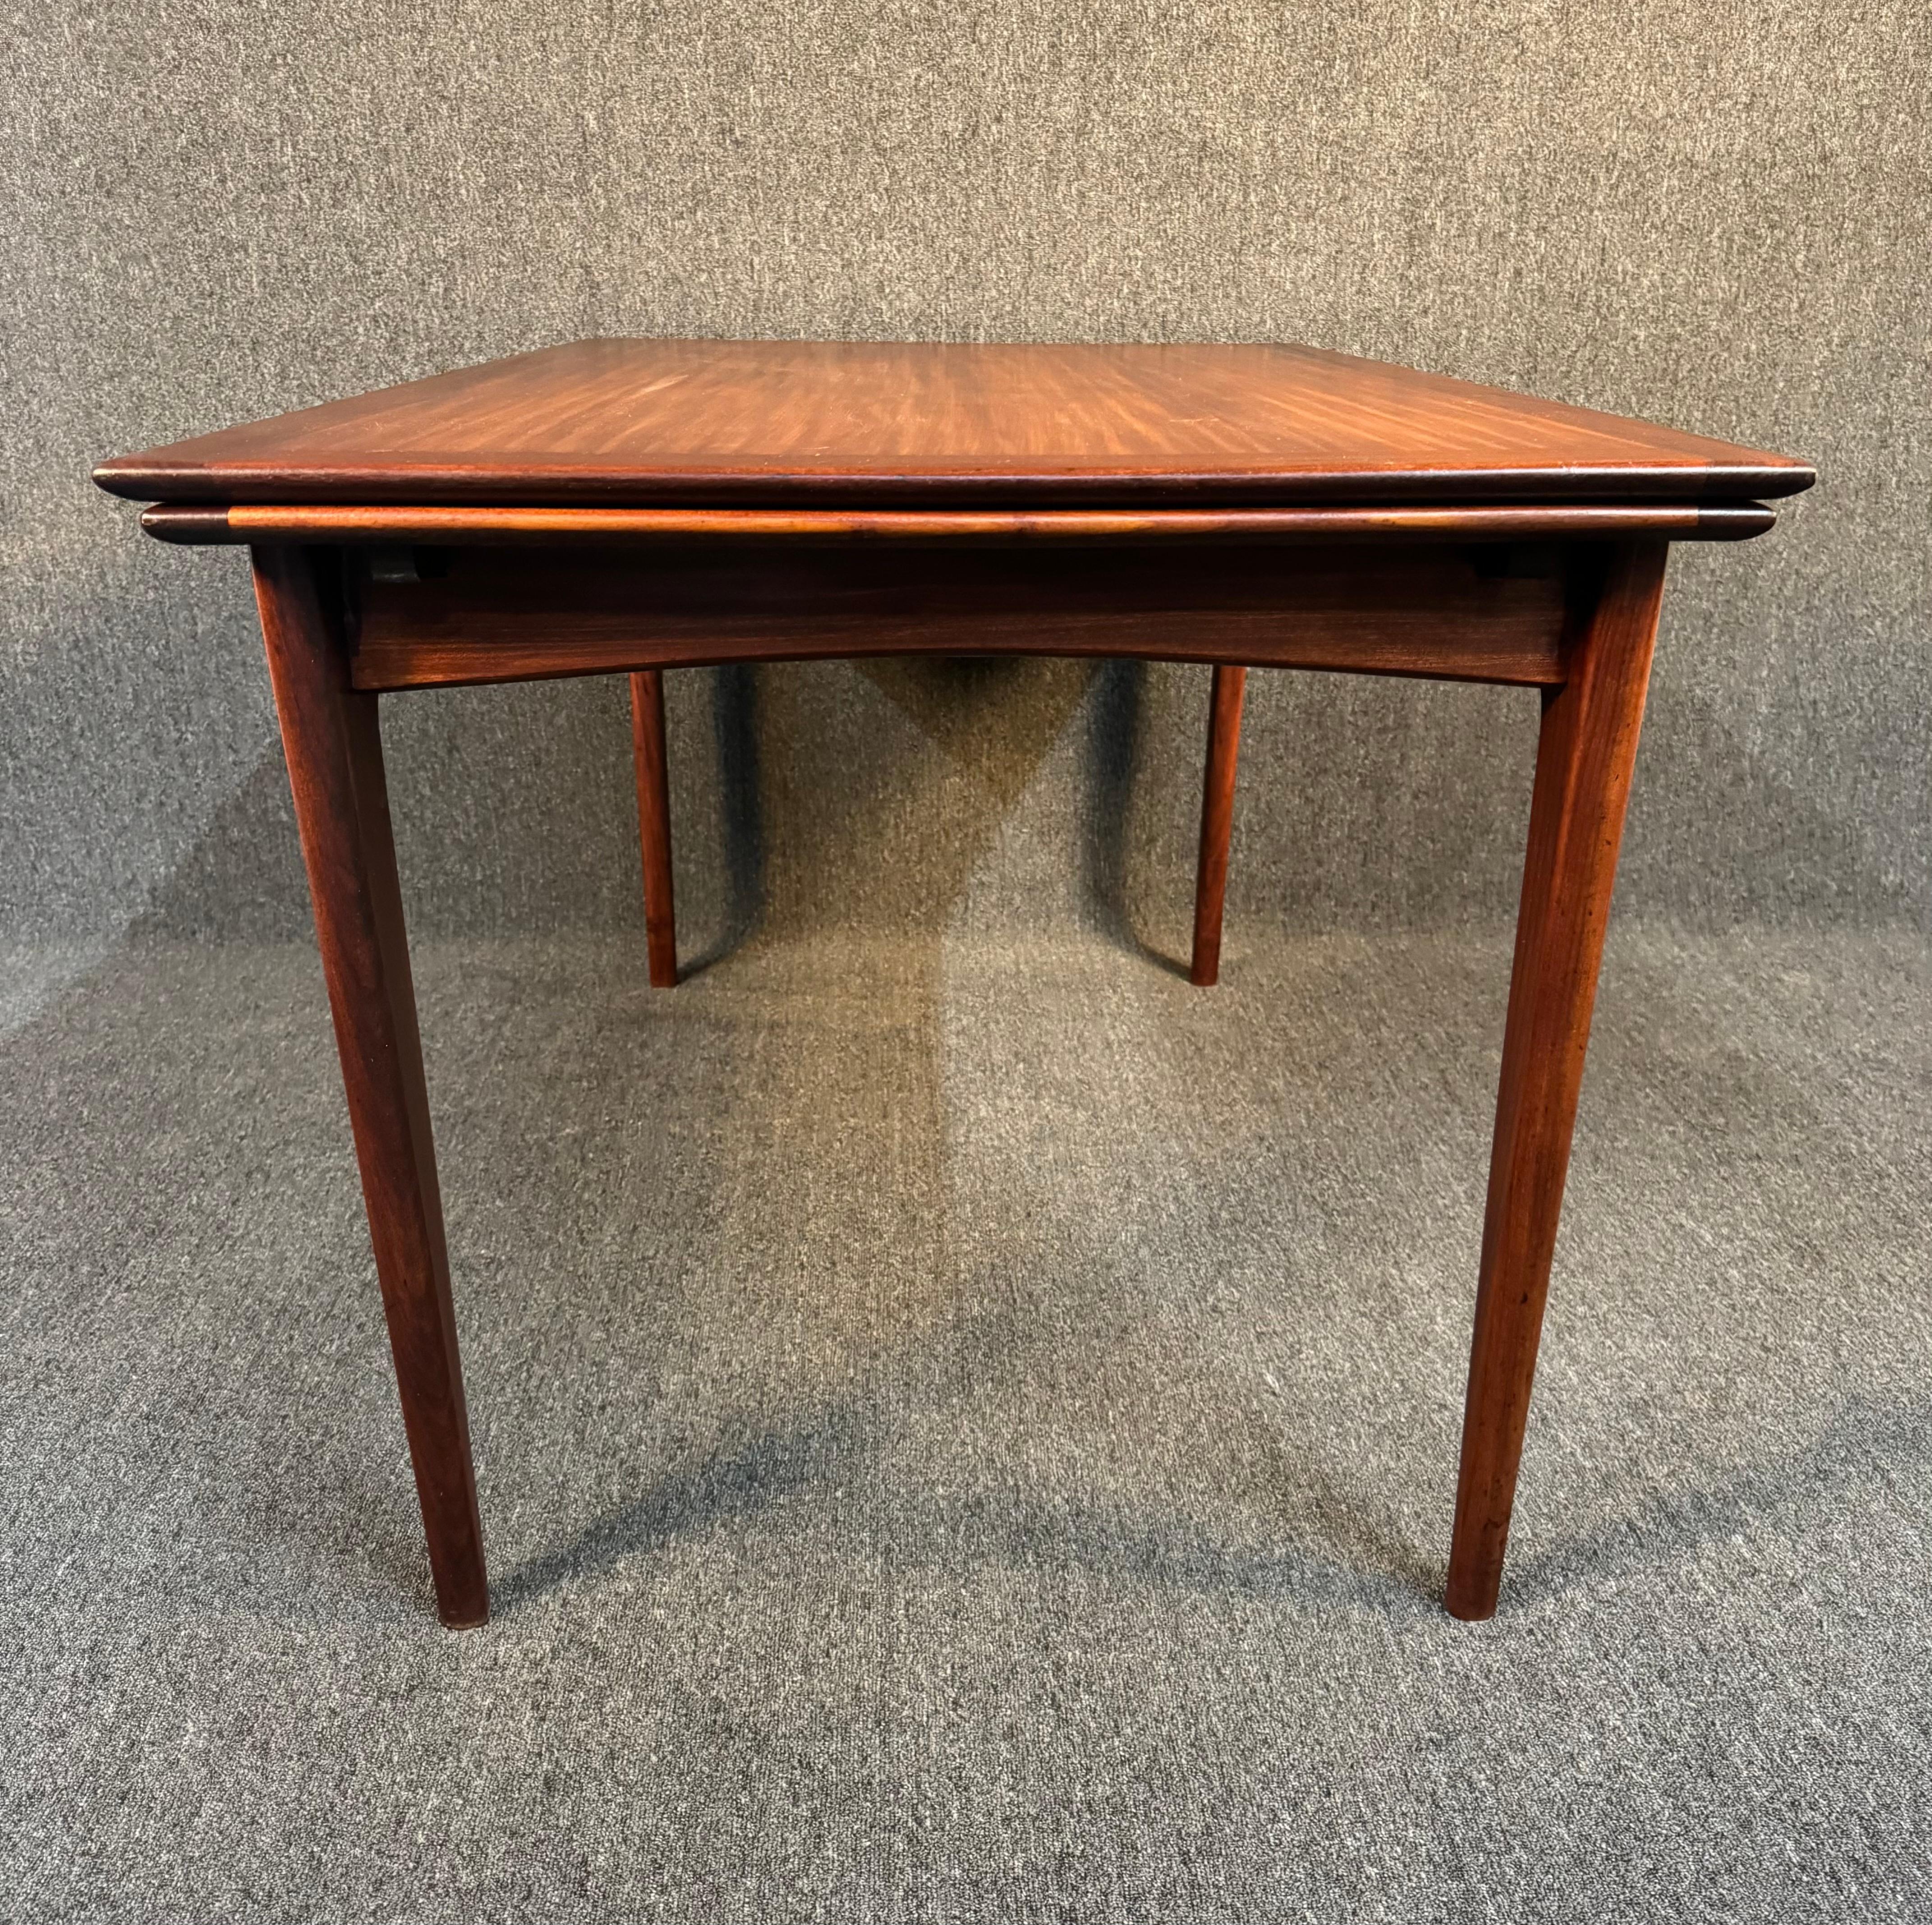 Vintage British Mid Century Modern Afromasia Teak Dining Table by A. Younger Ltd For Sale 6